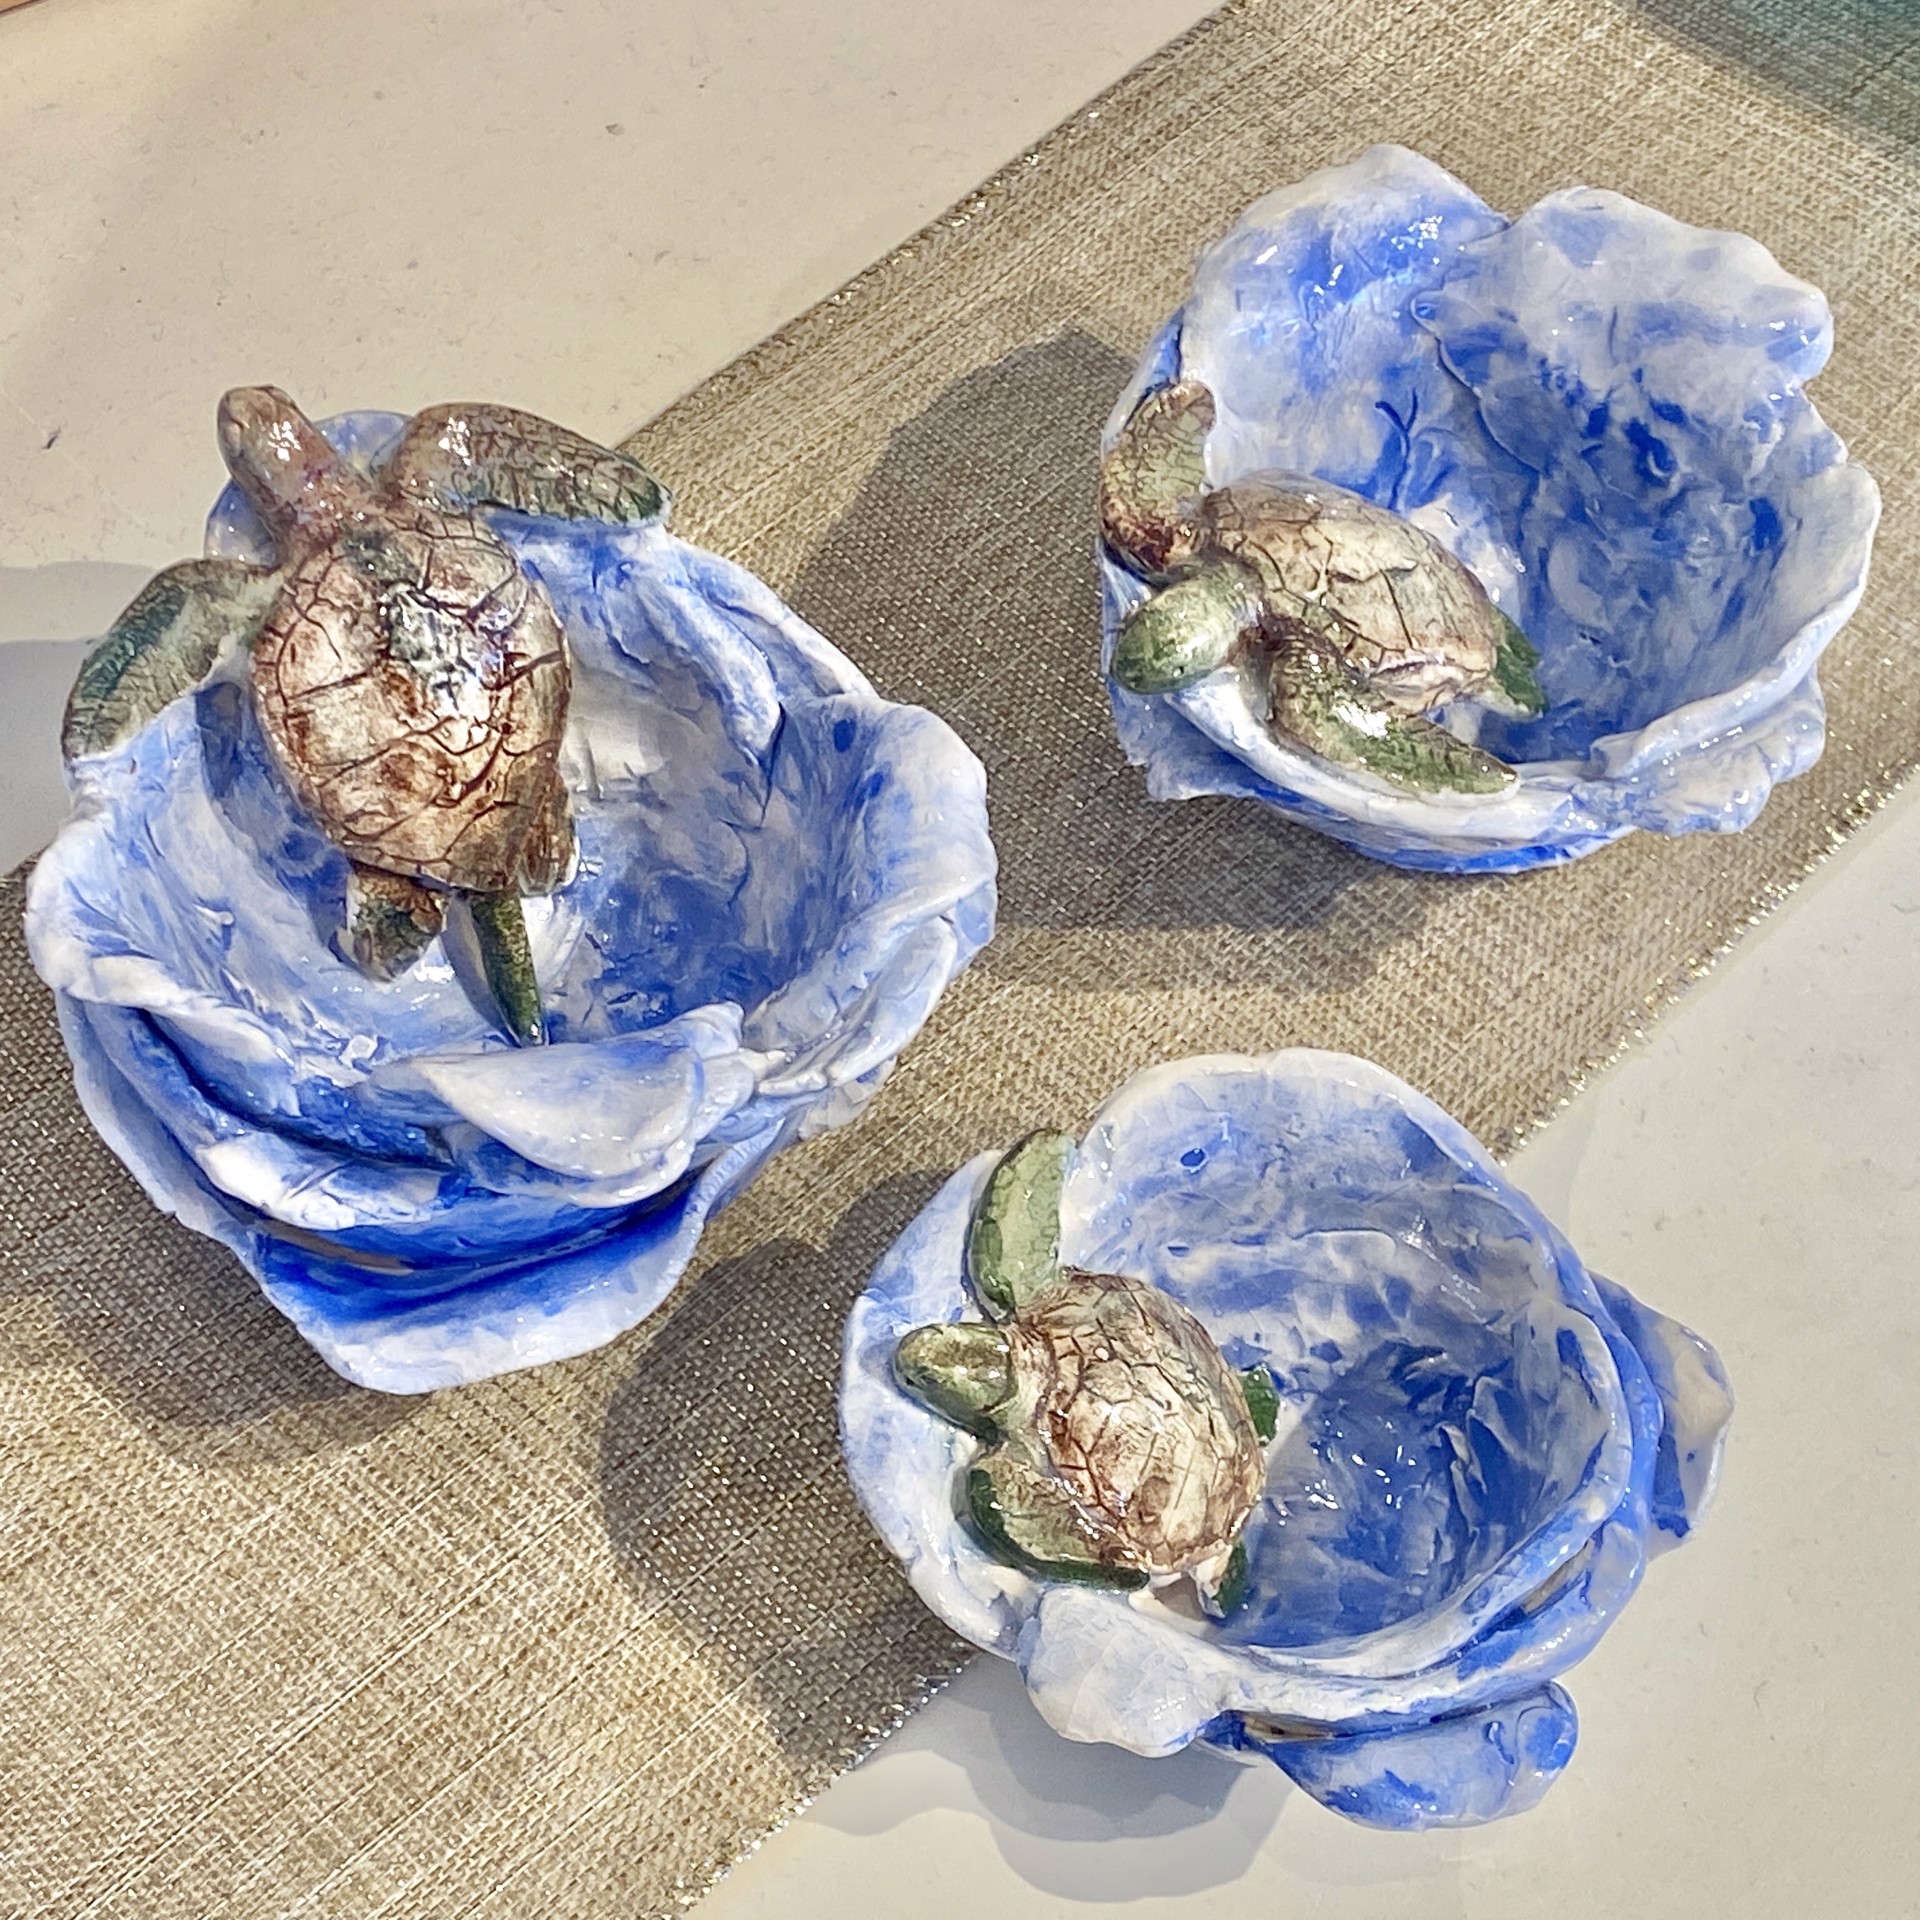 Turtle Riding the Wave by Barbara Bergwerf, Ceramics